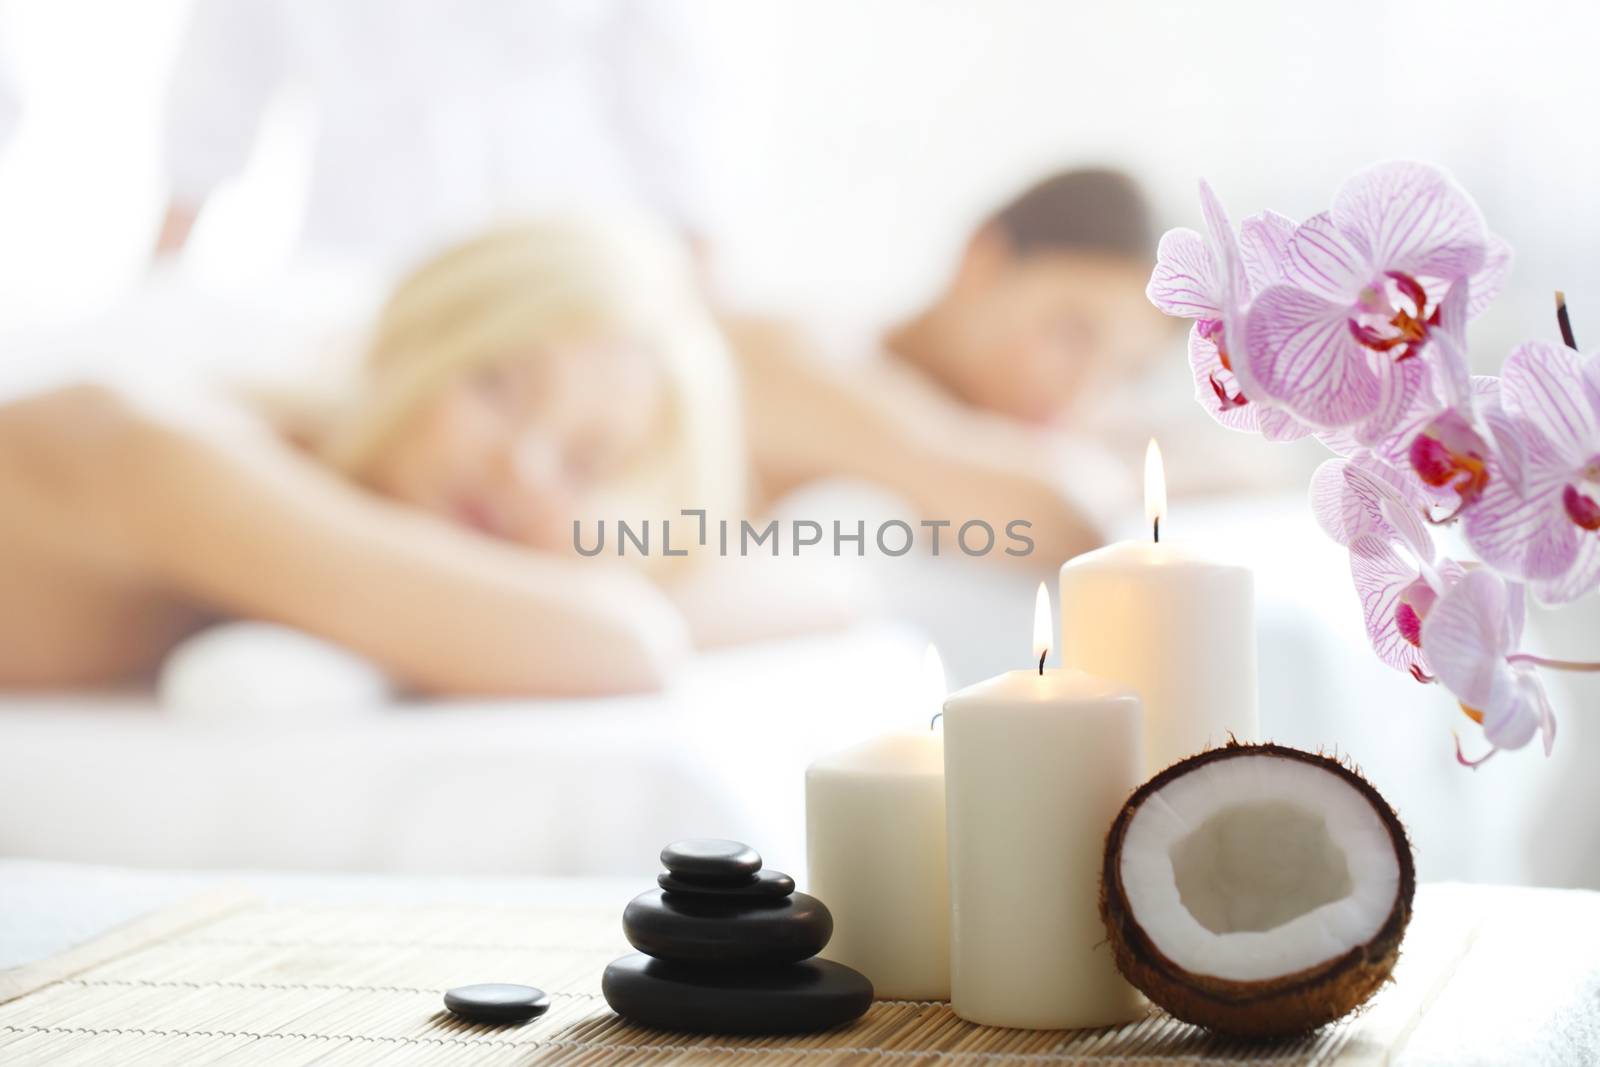 Spa massage tools and women getting massage on background